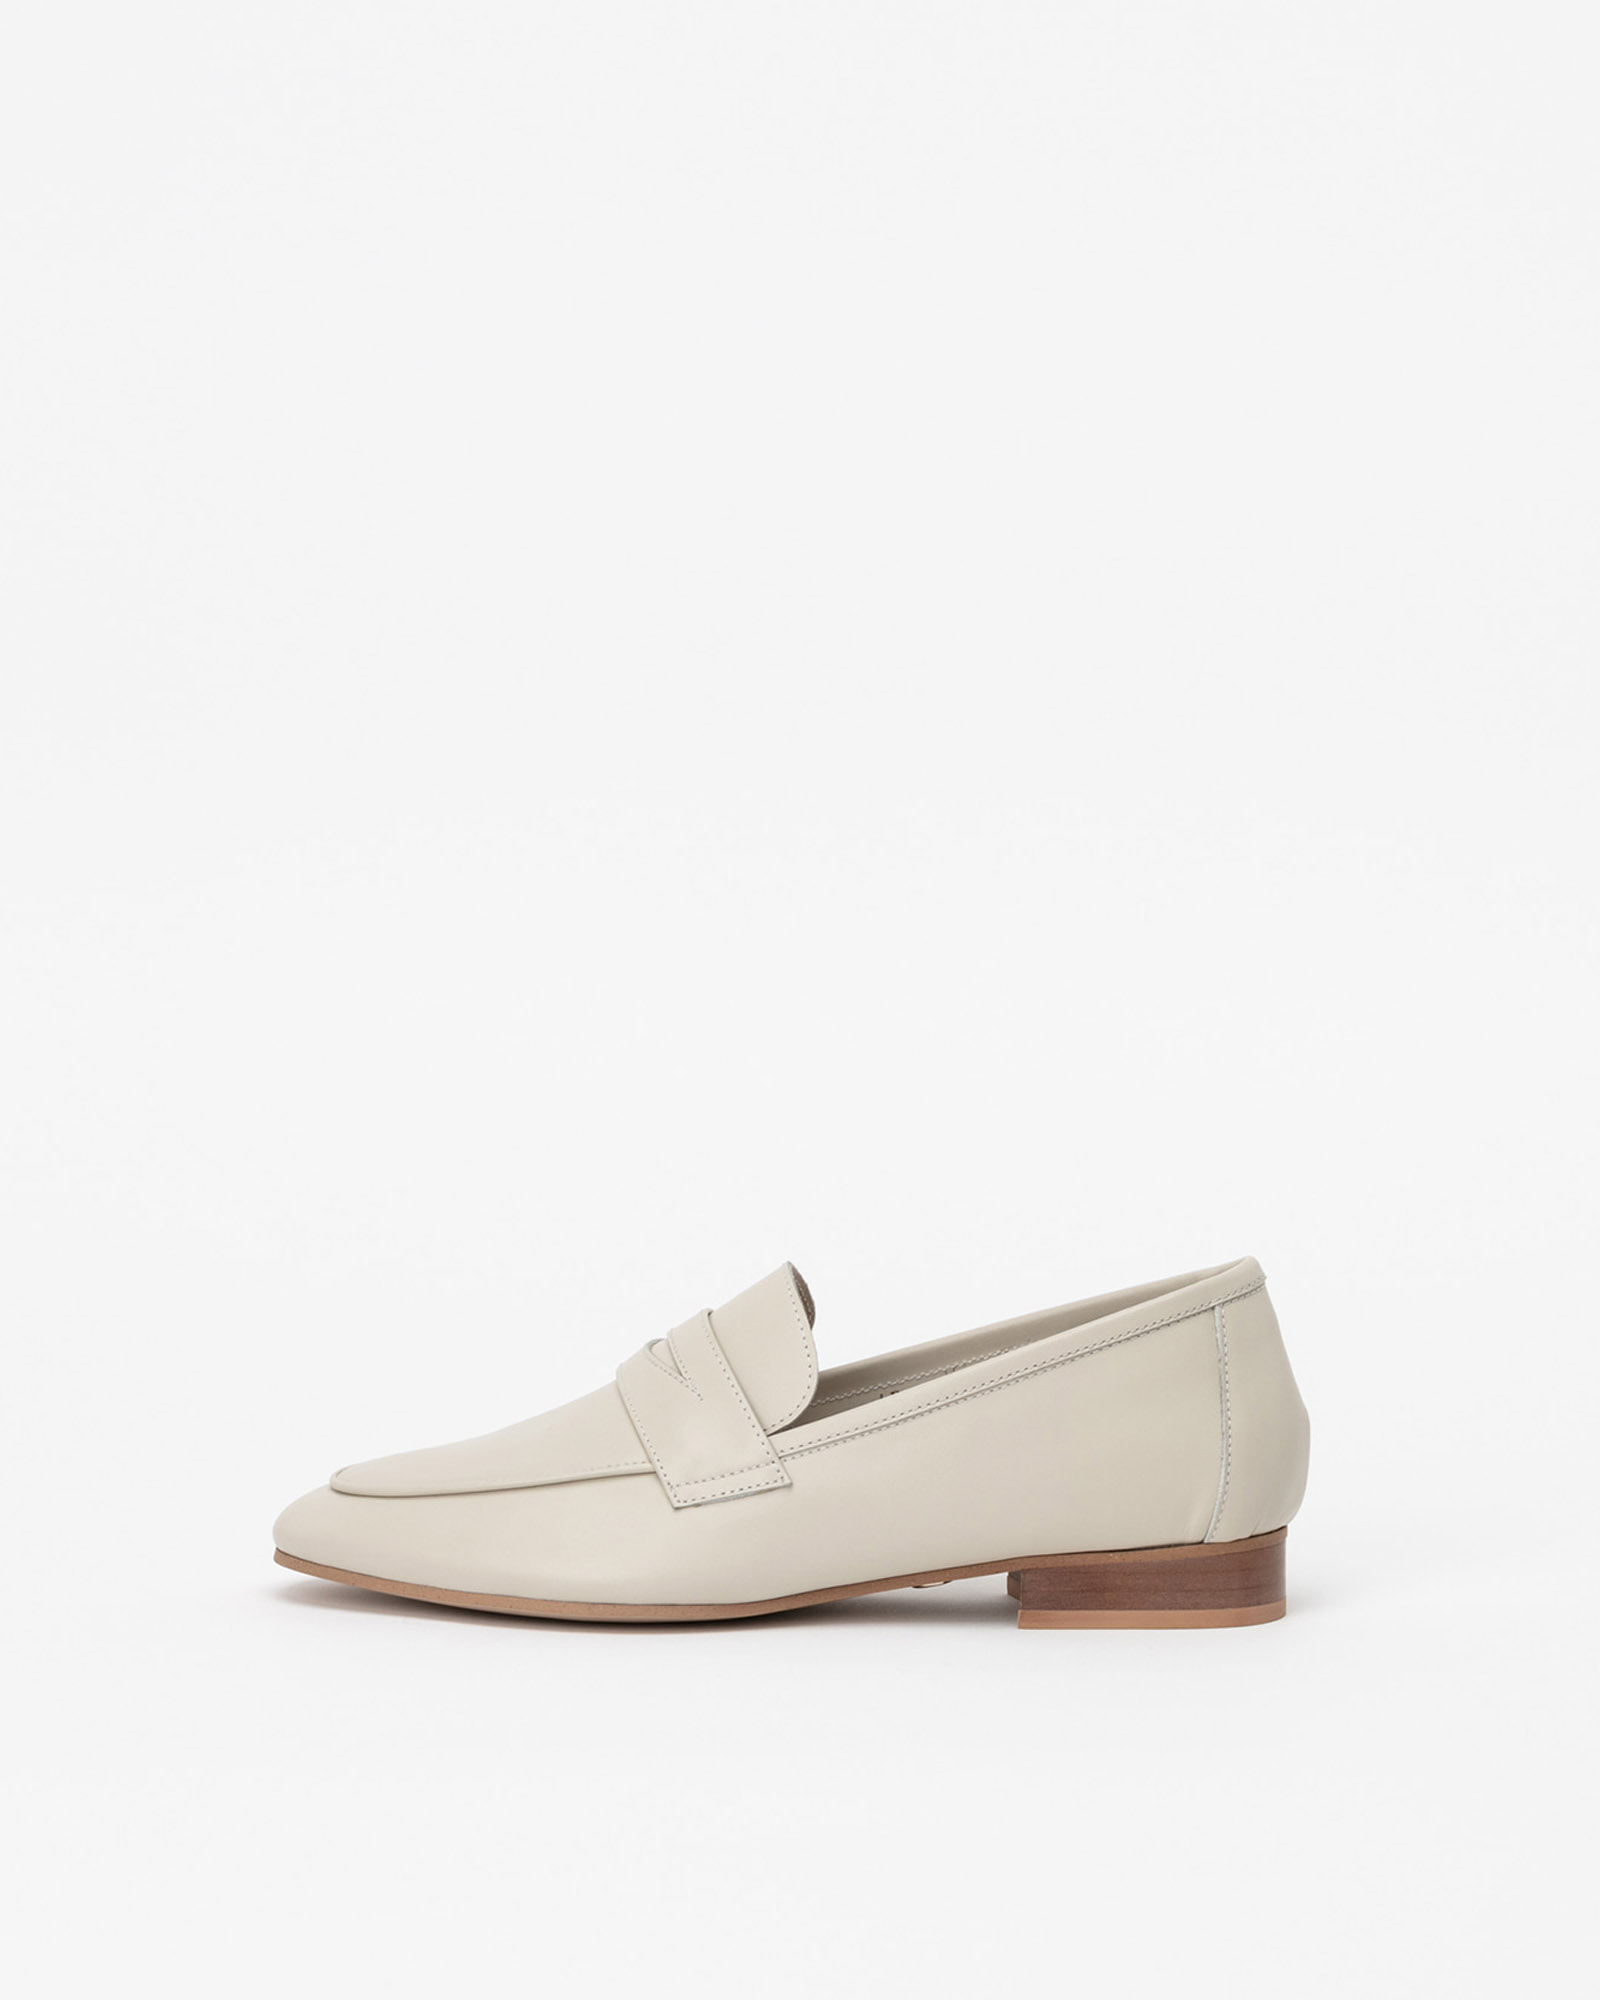 Gant Soft Loafers in Ivory Oiled Kip